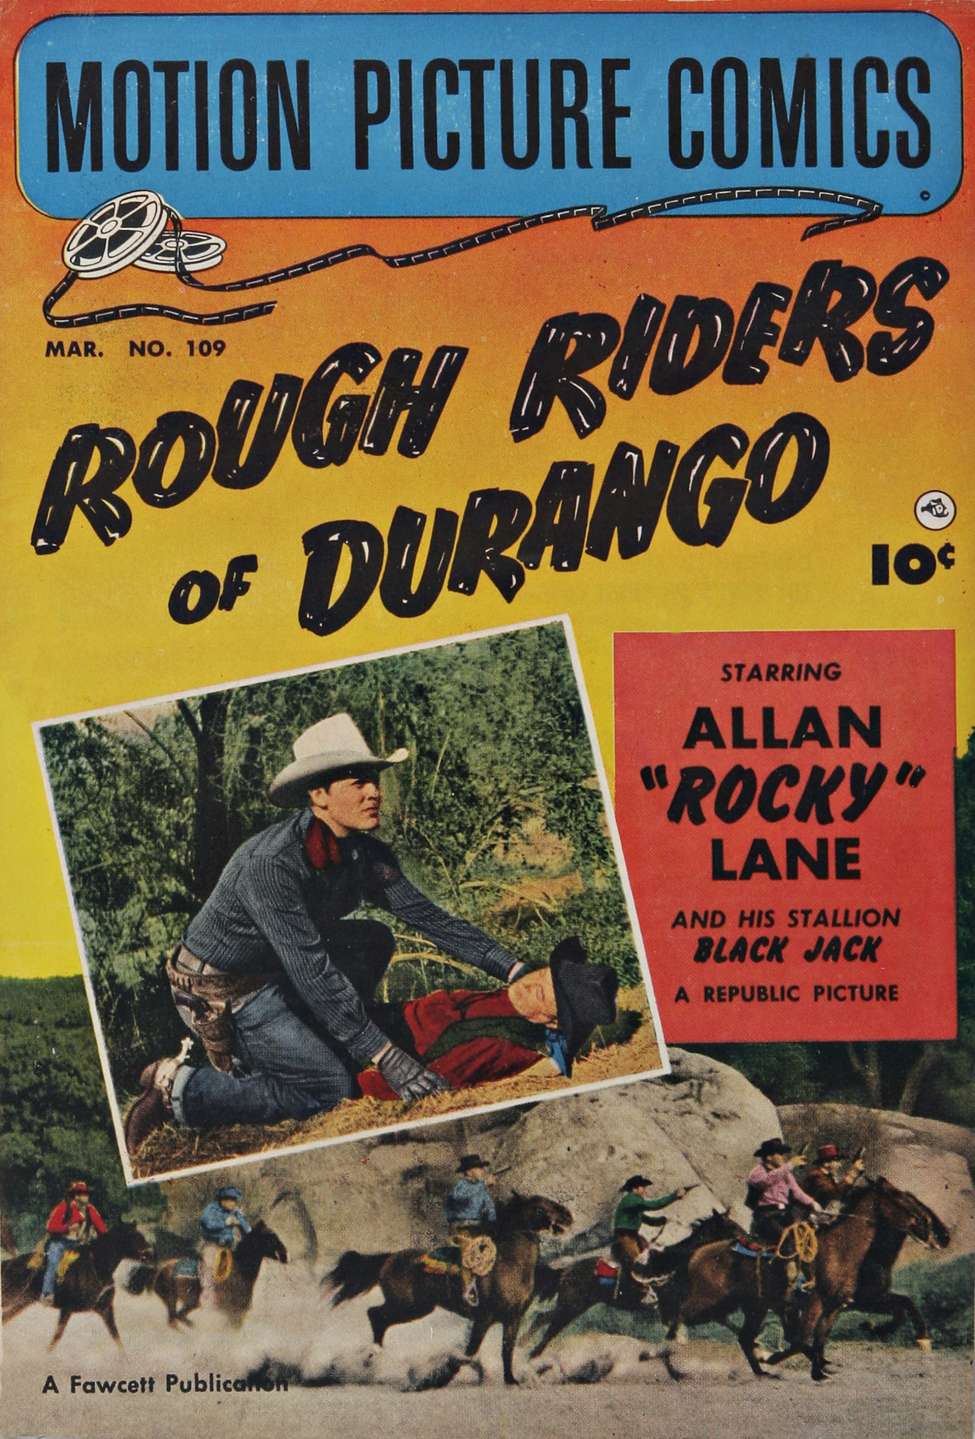 Book Cover For Motion Picture Comics 109 Rough Riders of Durango (alt)